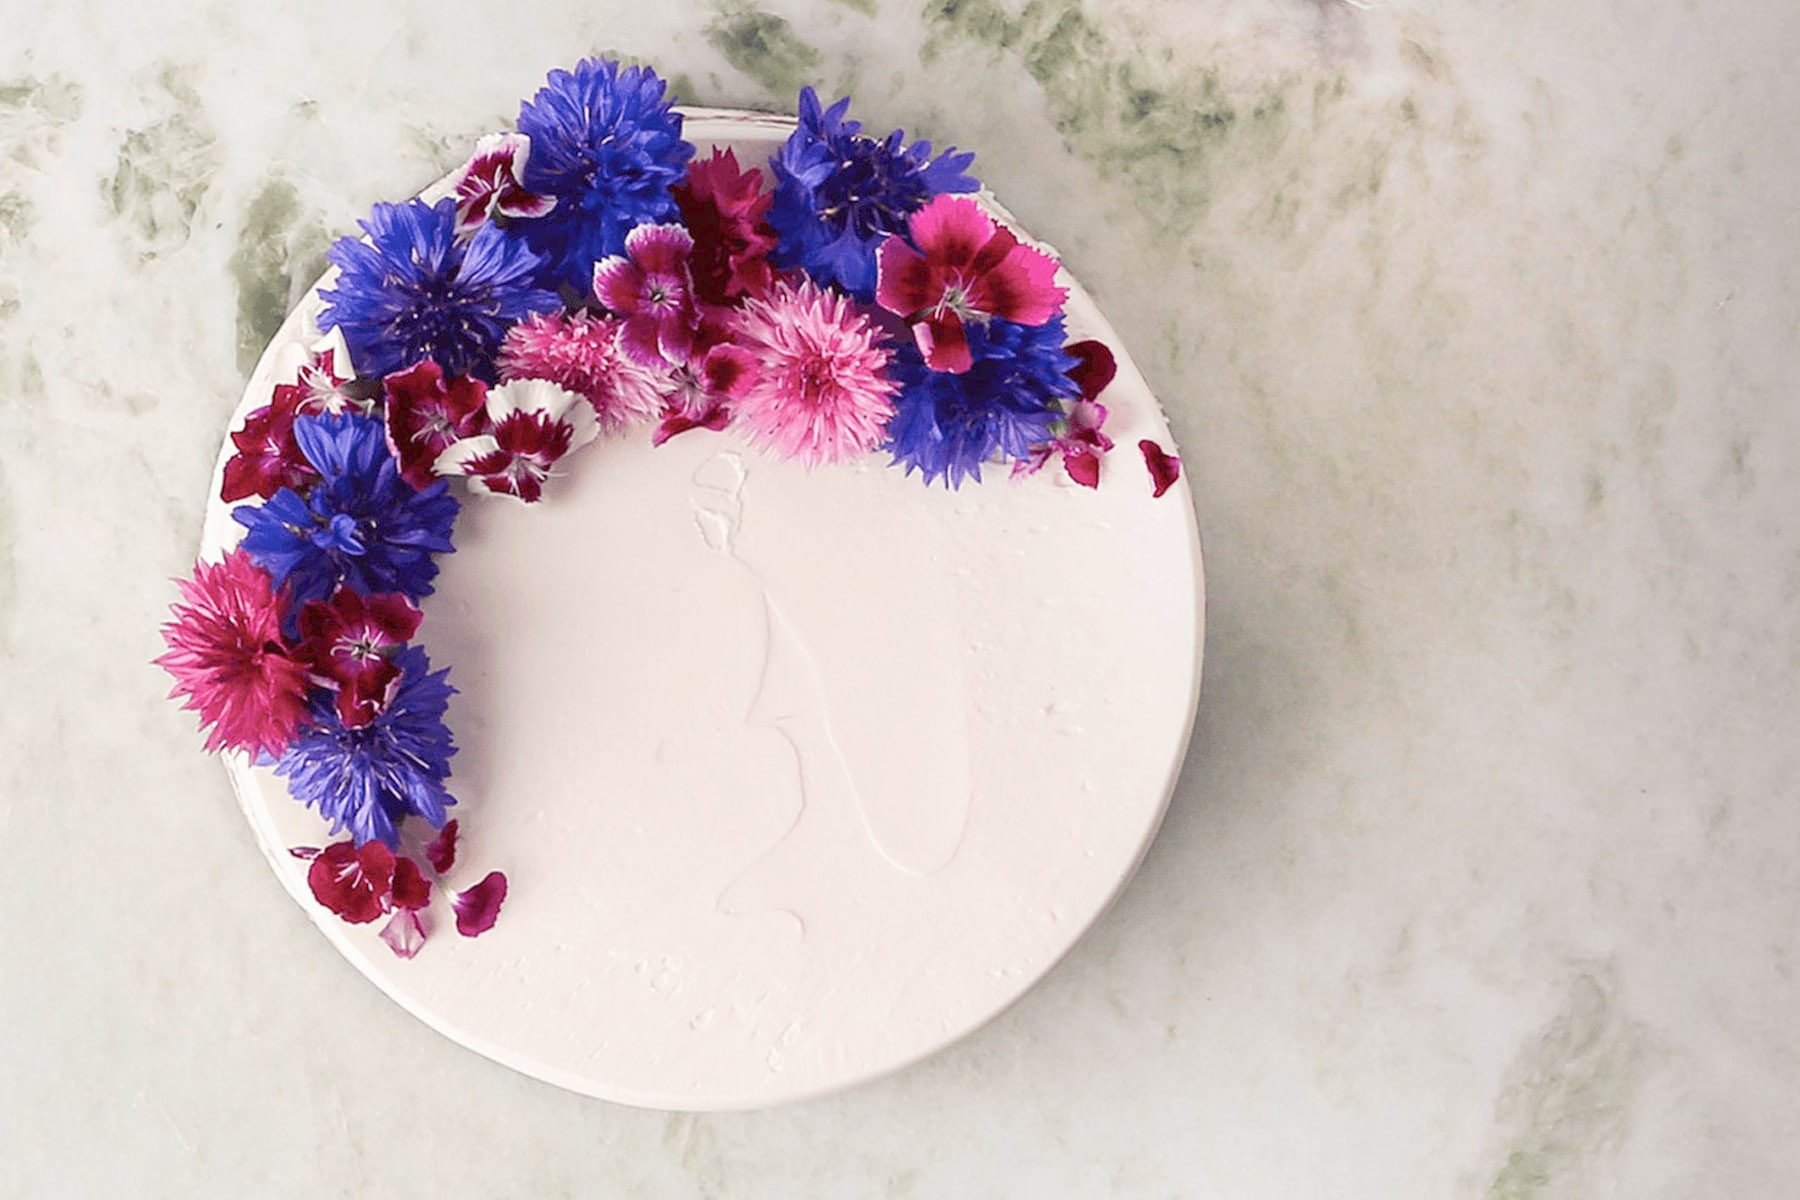 Edible Flowers: How to use and where to find them - Paperless Post